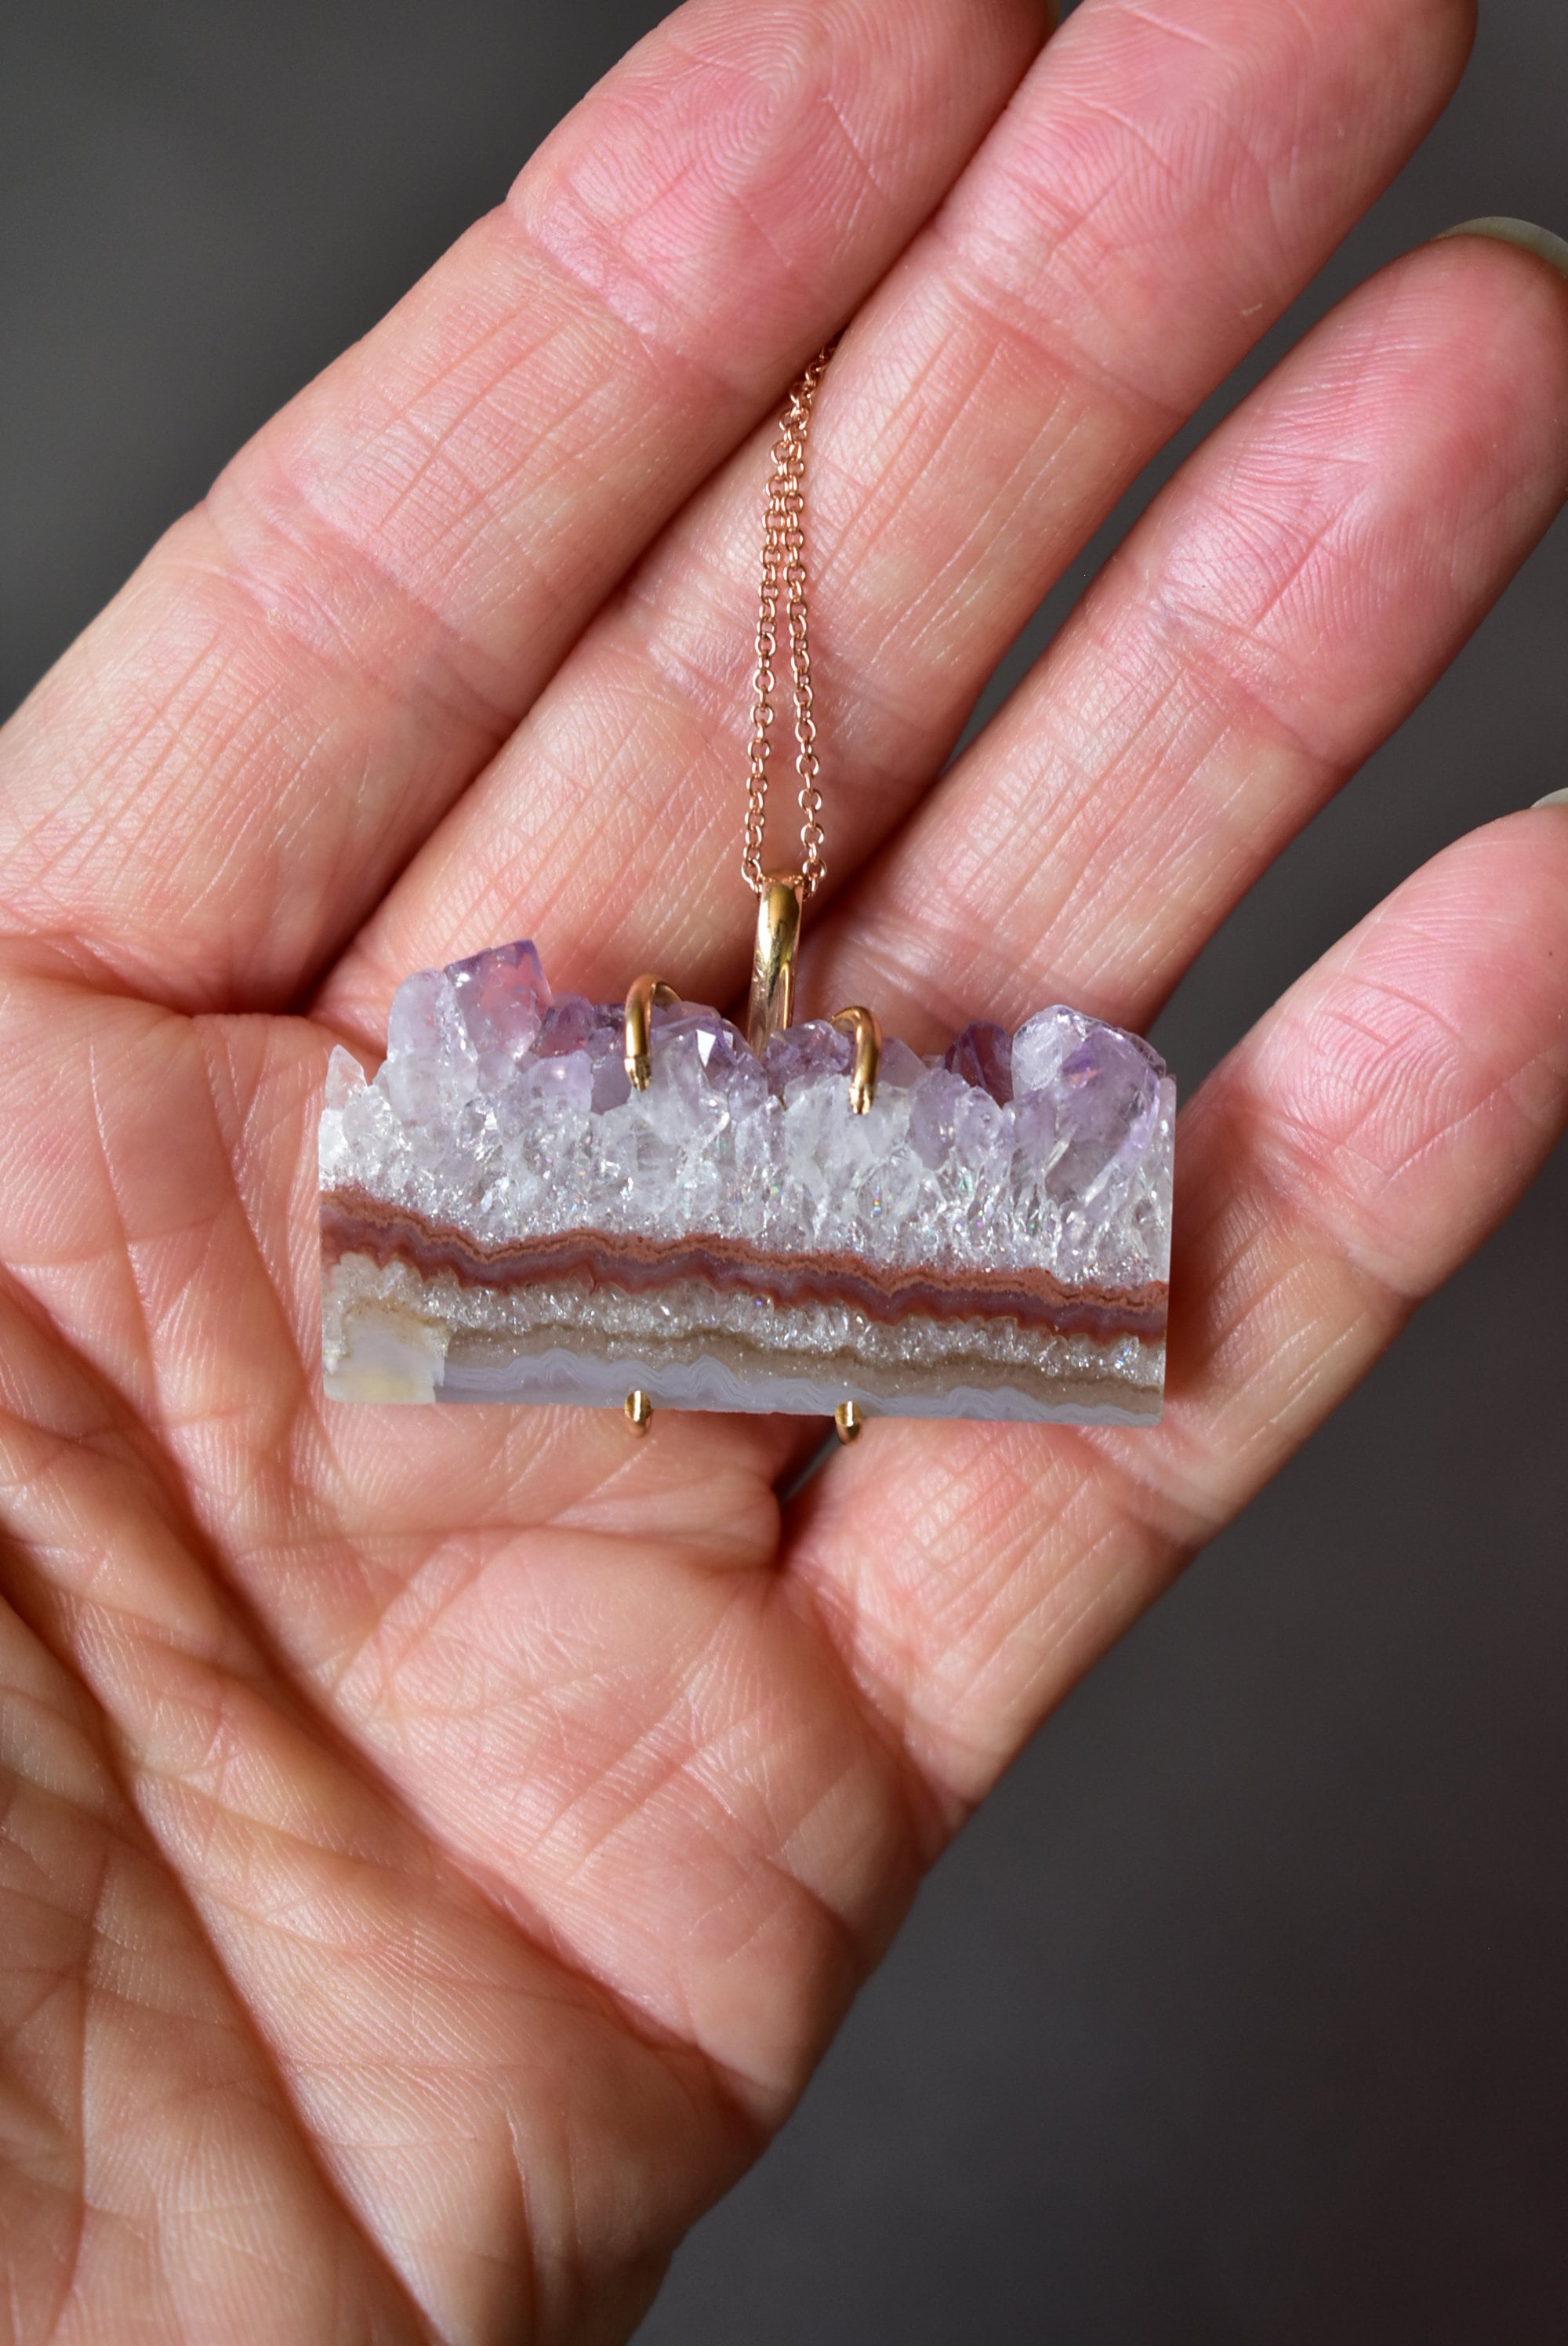 Amethyst Crystal and Gold Fill Pendant Necklace, Raw Crystal Slice Pendant, Sagittarius Zodiac & Crown Chakra Color, Mountain Range Jewelry